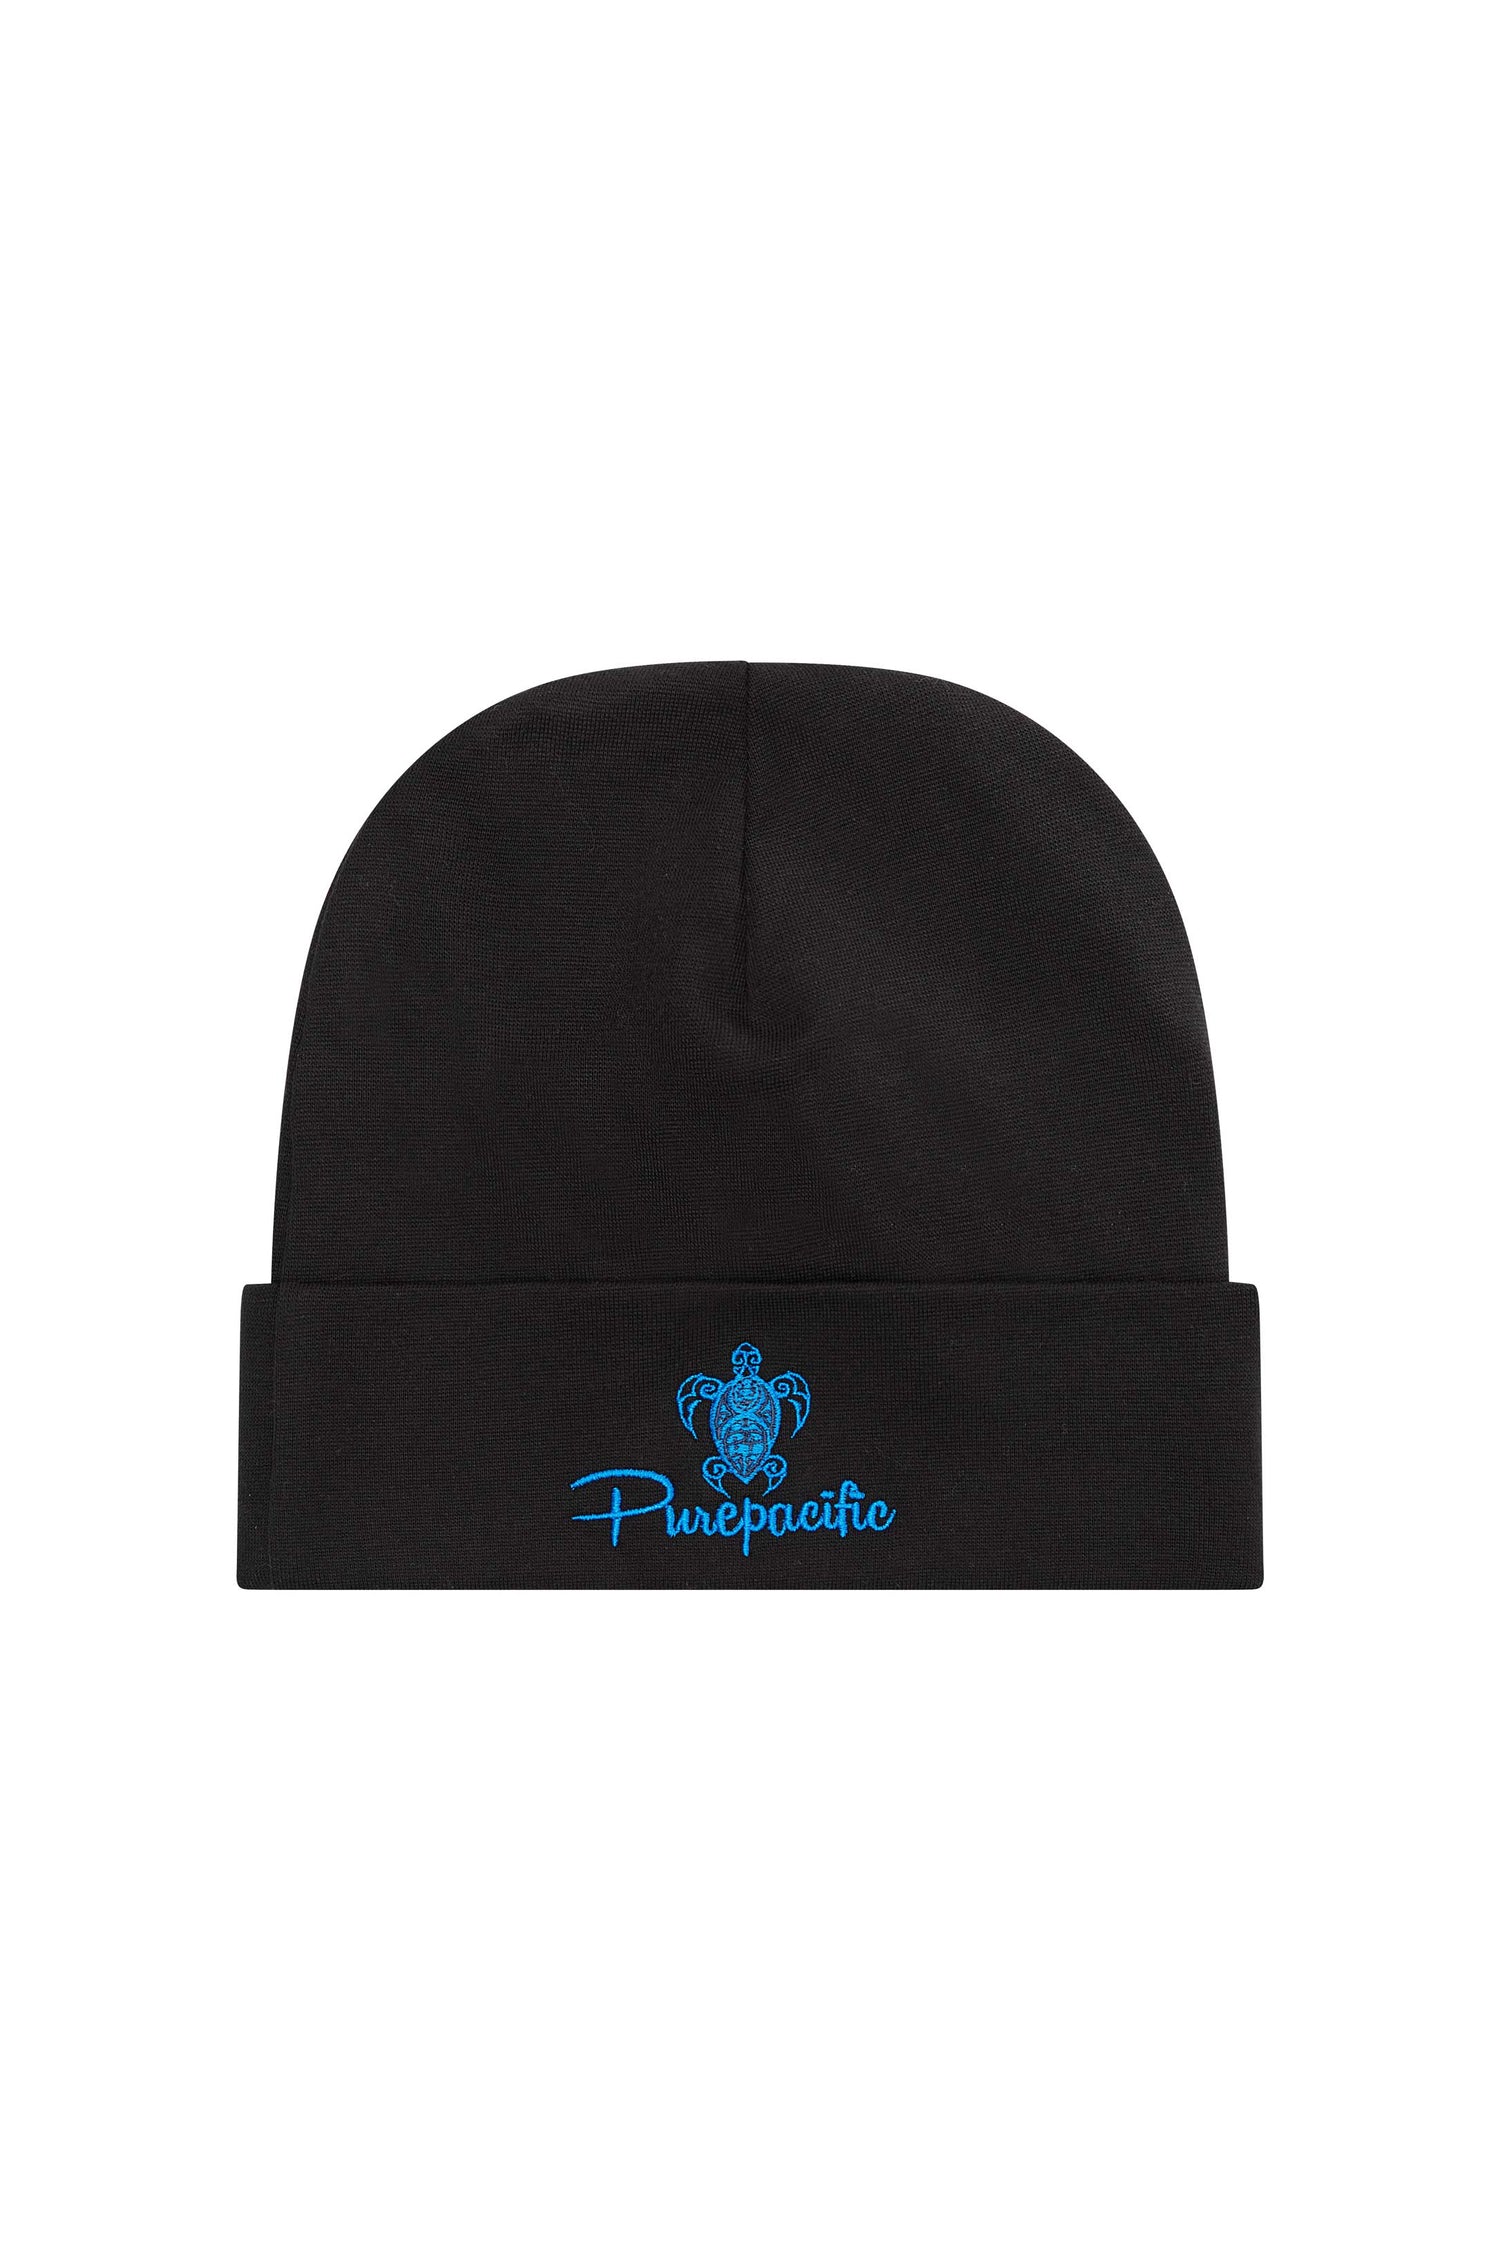 Embroidered Unisex Organic RPET Beanie